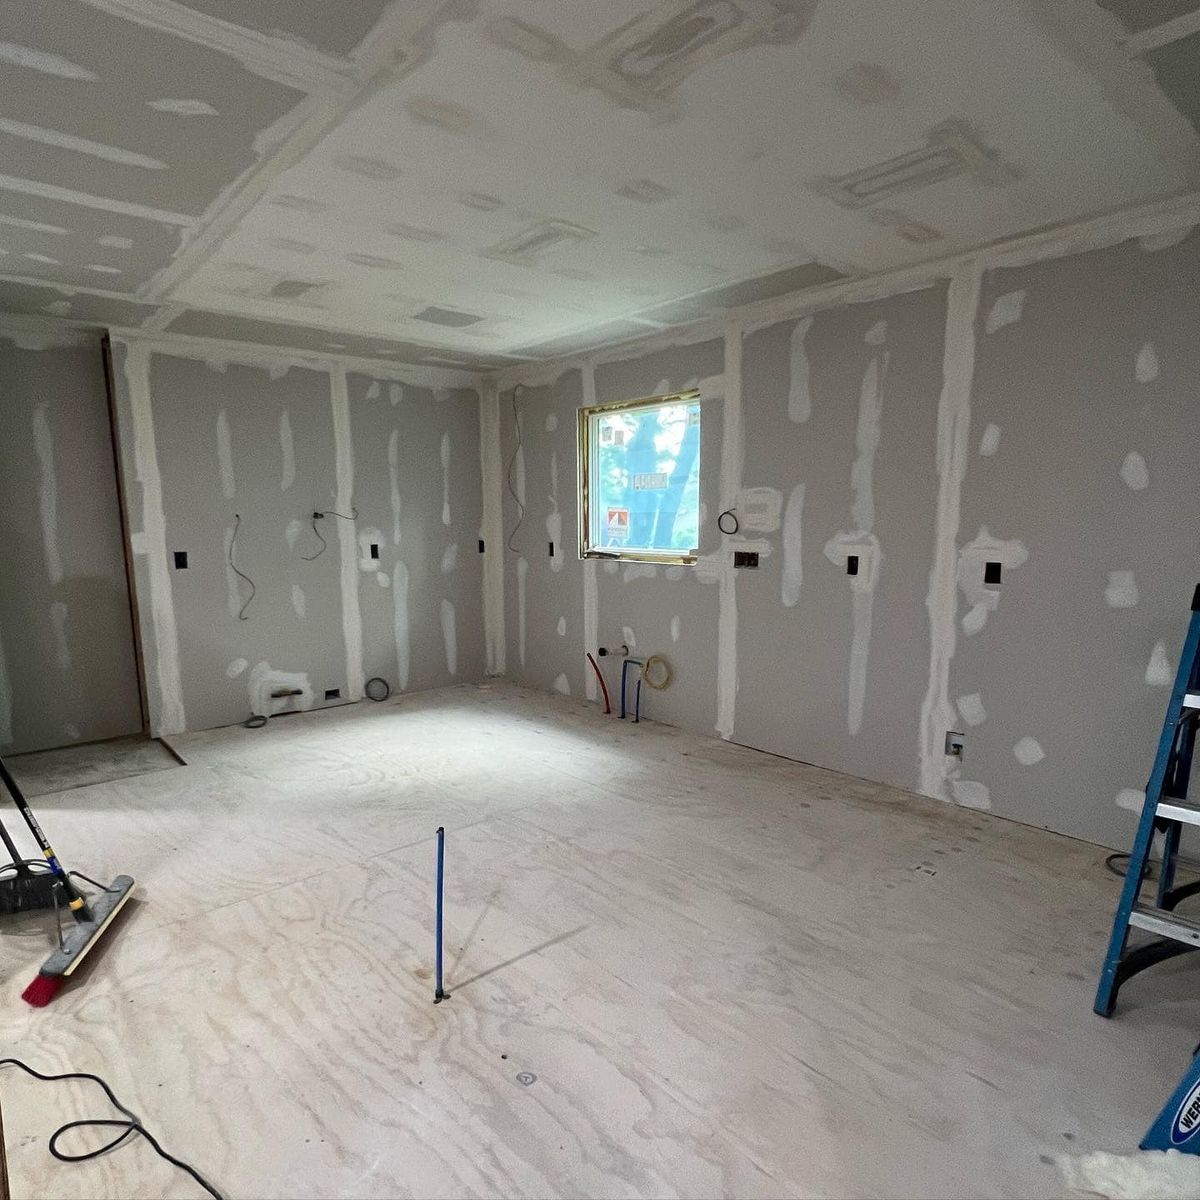 Drywall and Plastering  for Star-R Dust, LLC in Succasunna, NJ